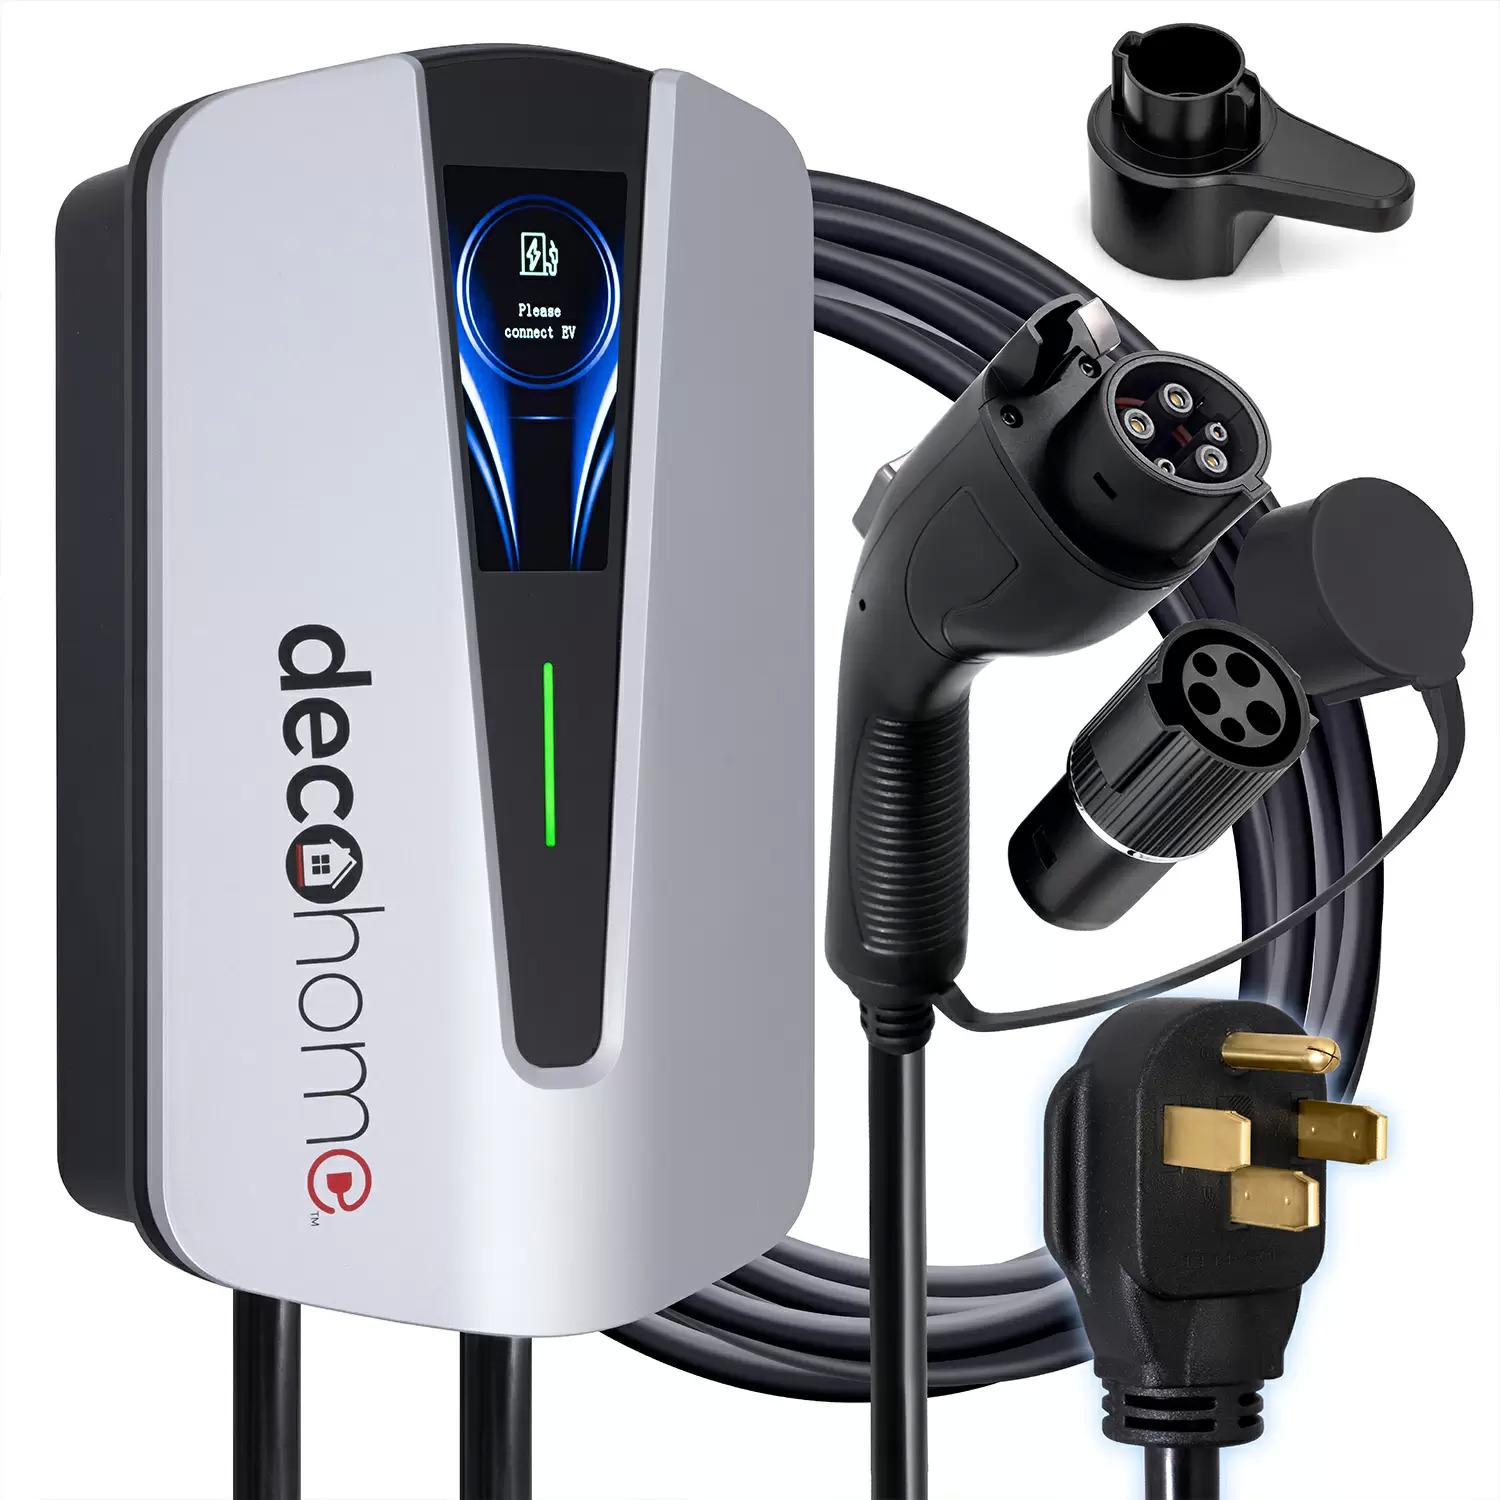 Deco Home Level 2 EV Charging Station for $209 Shipped